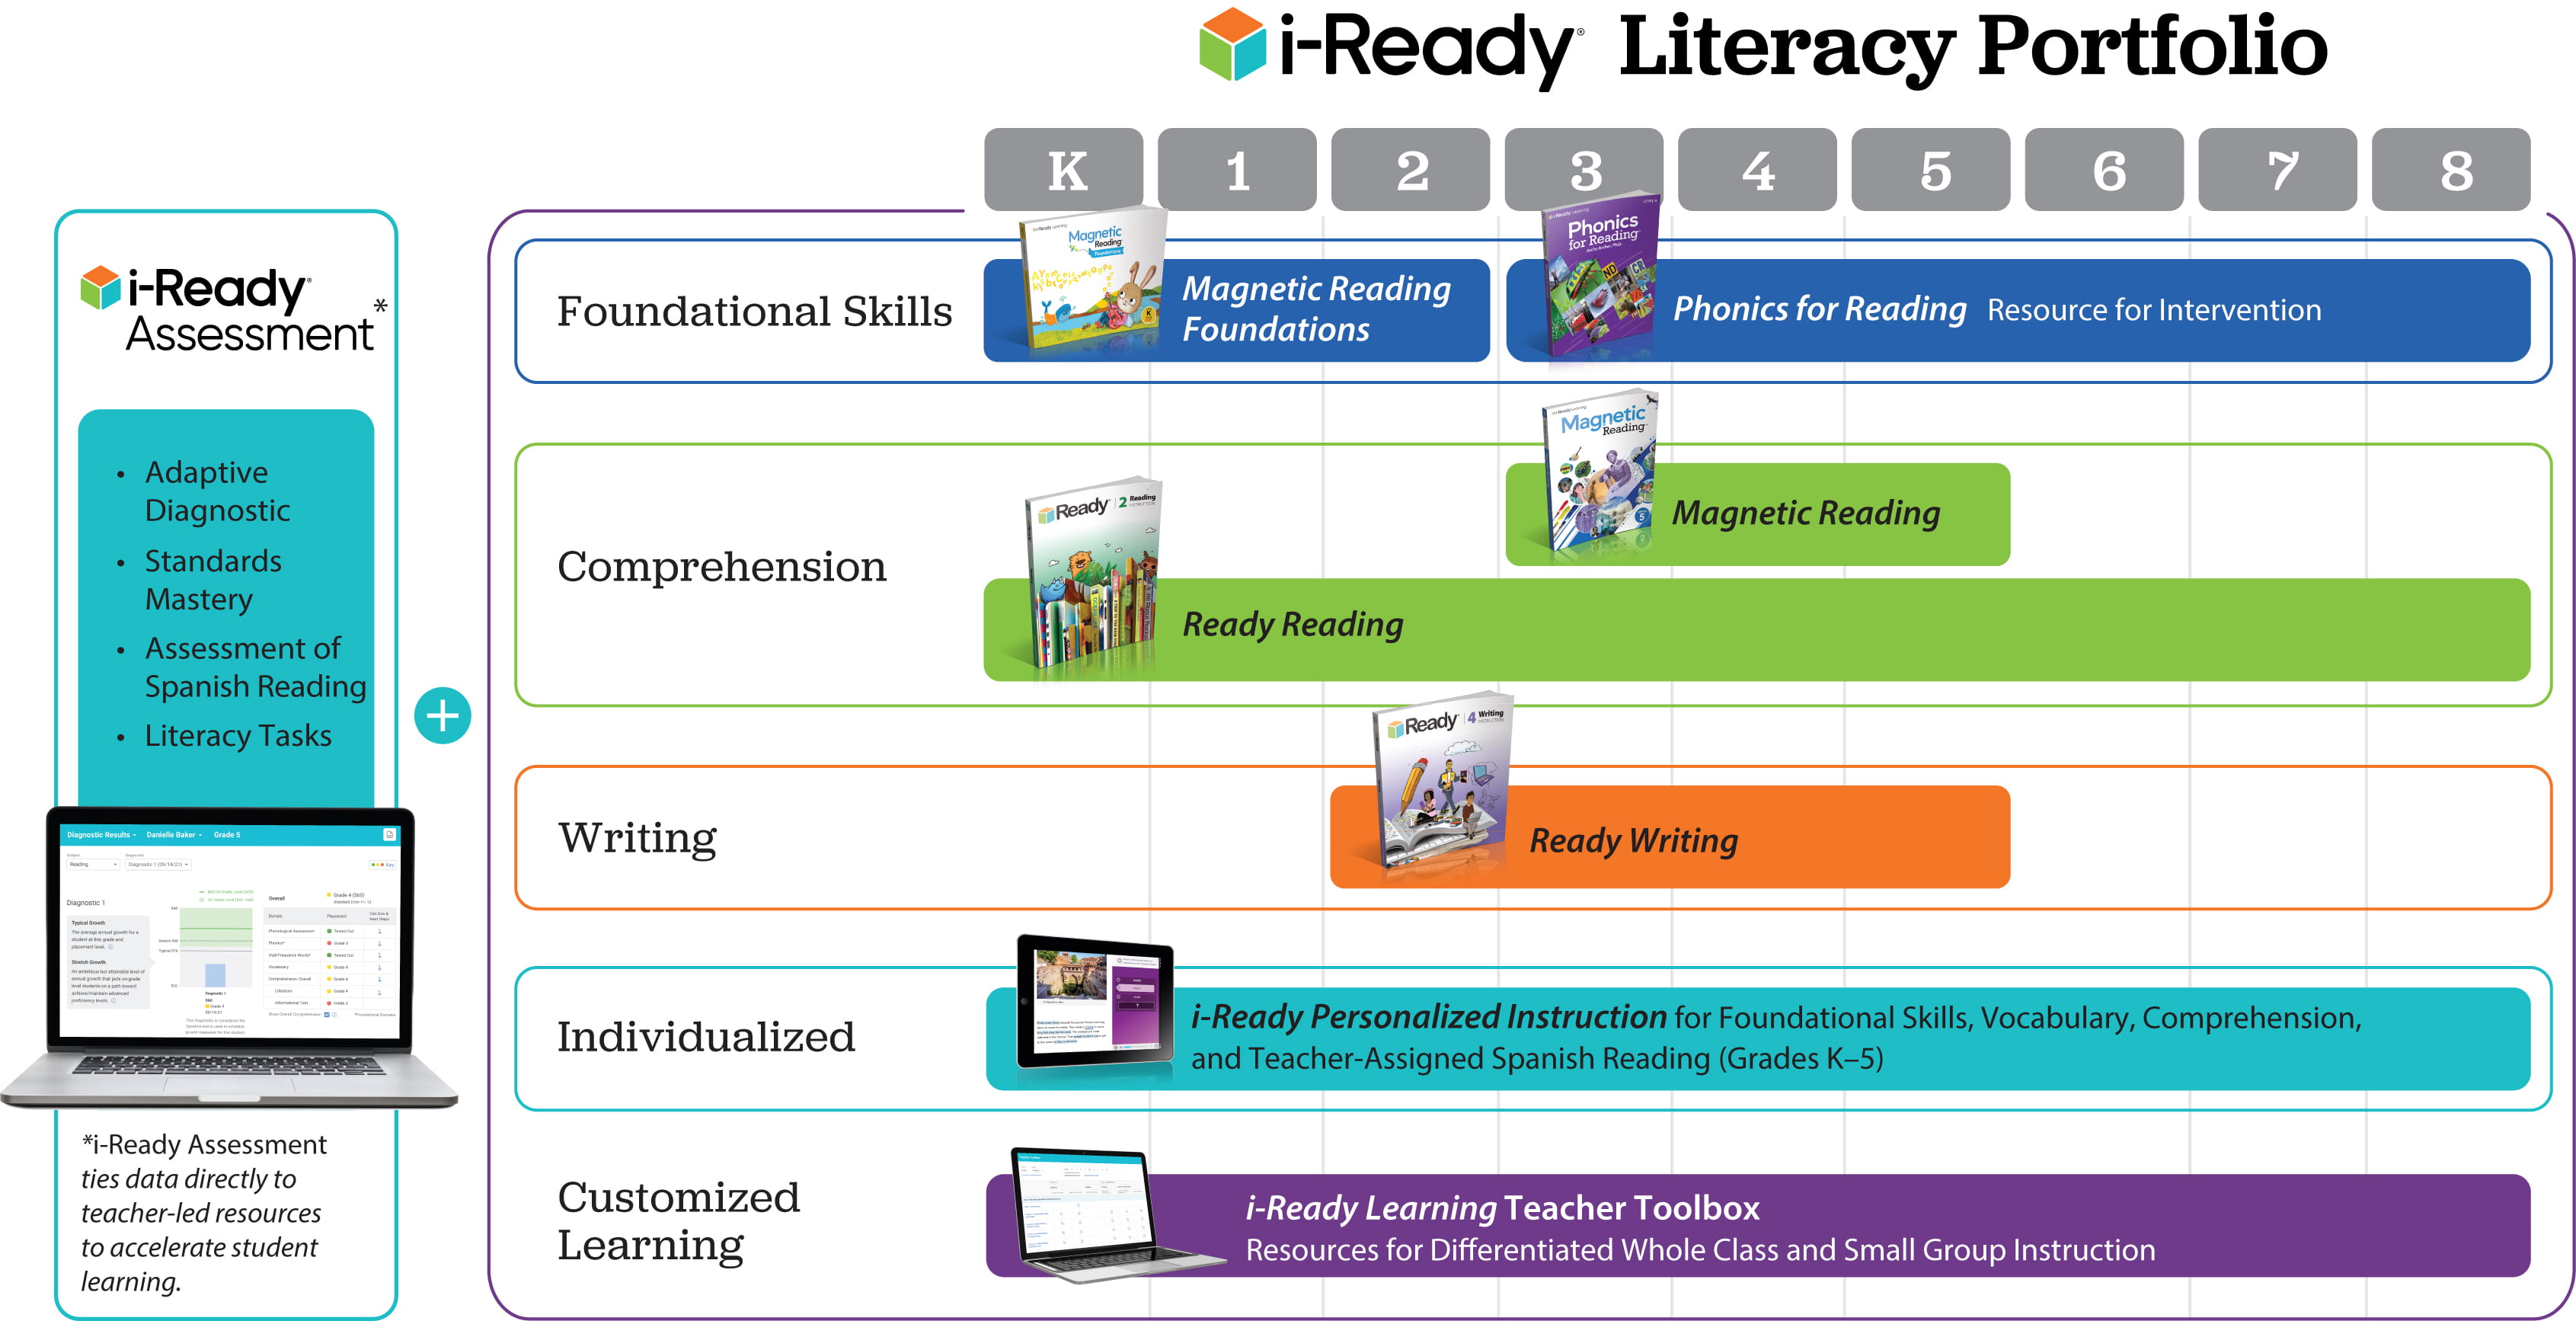 i-Ready assessment connects with i-Ready literacy products across grade levels and needs.